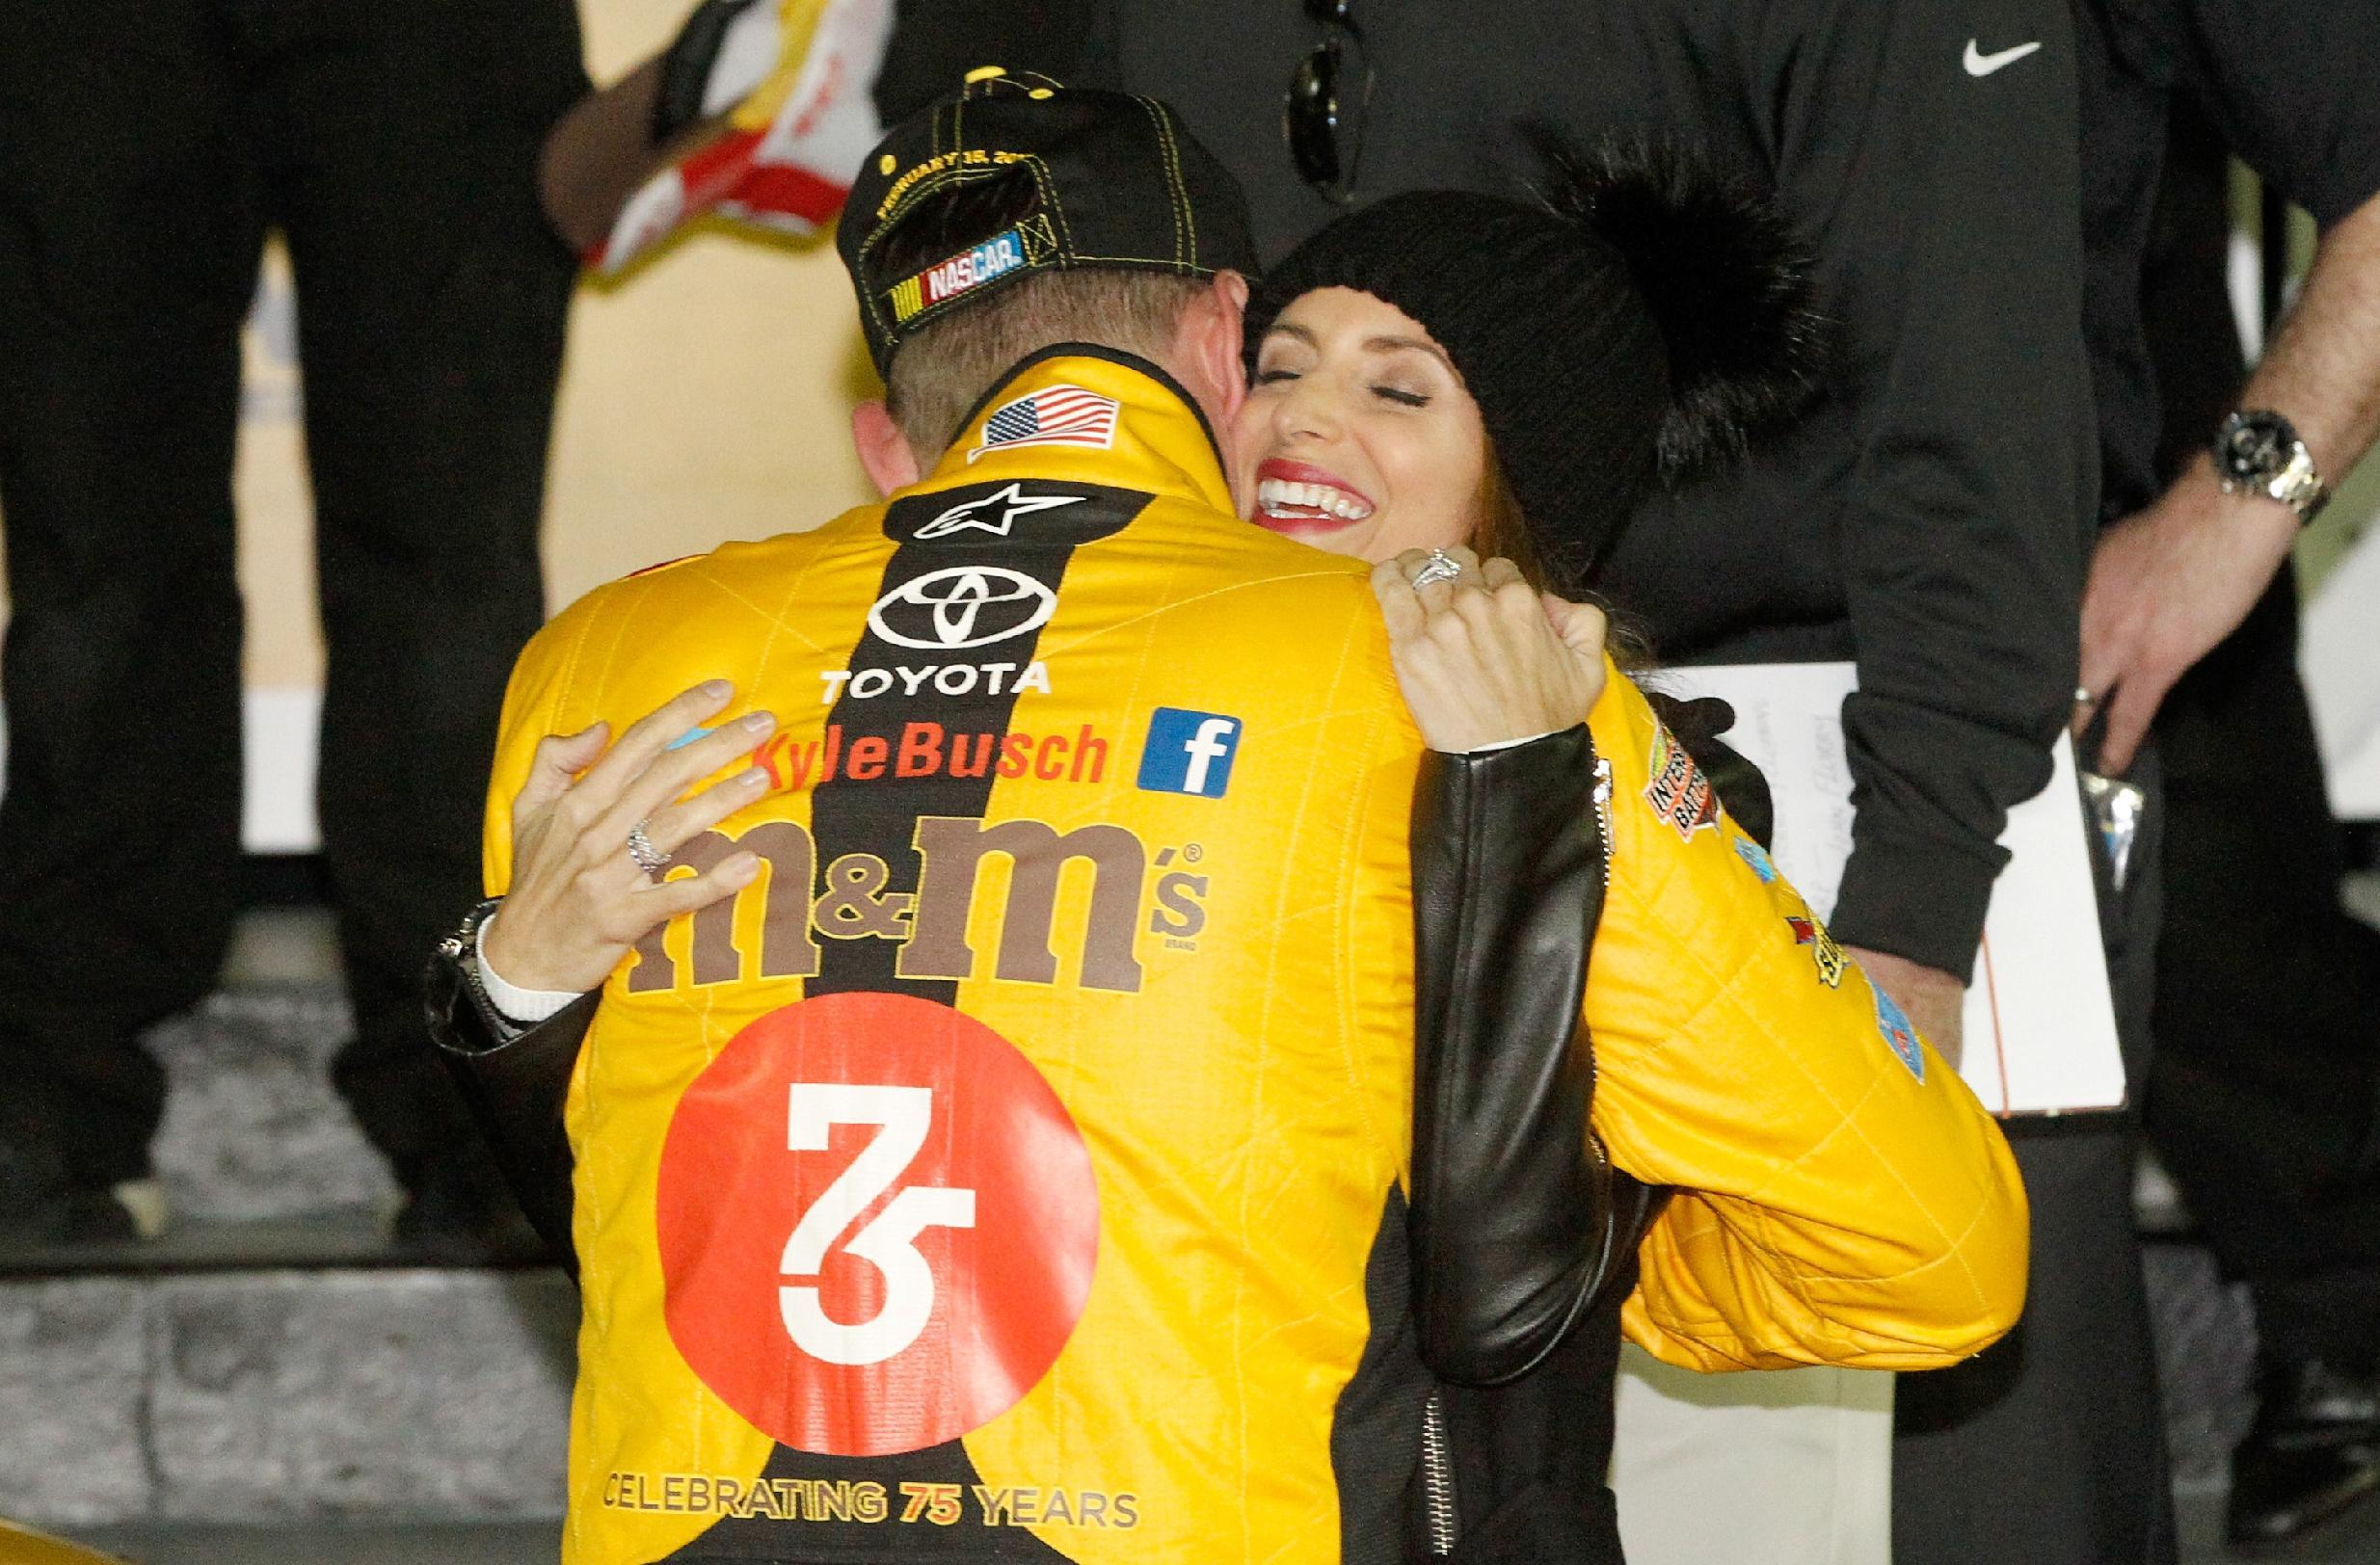 A year after Kyle Busch wrecked at Daytona, he and wife Samantha were back celebrating. (Getty Images)